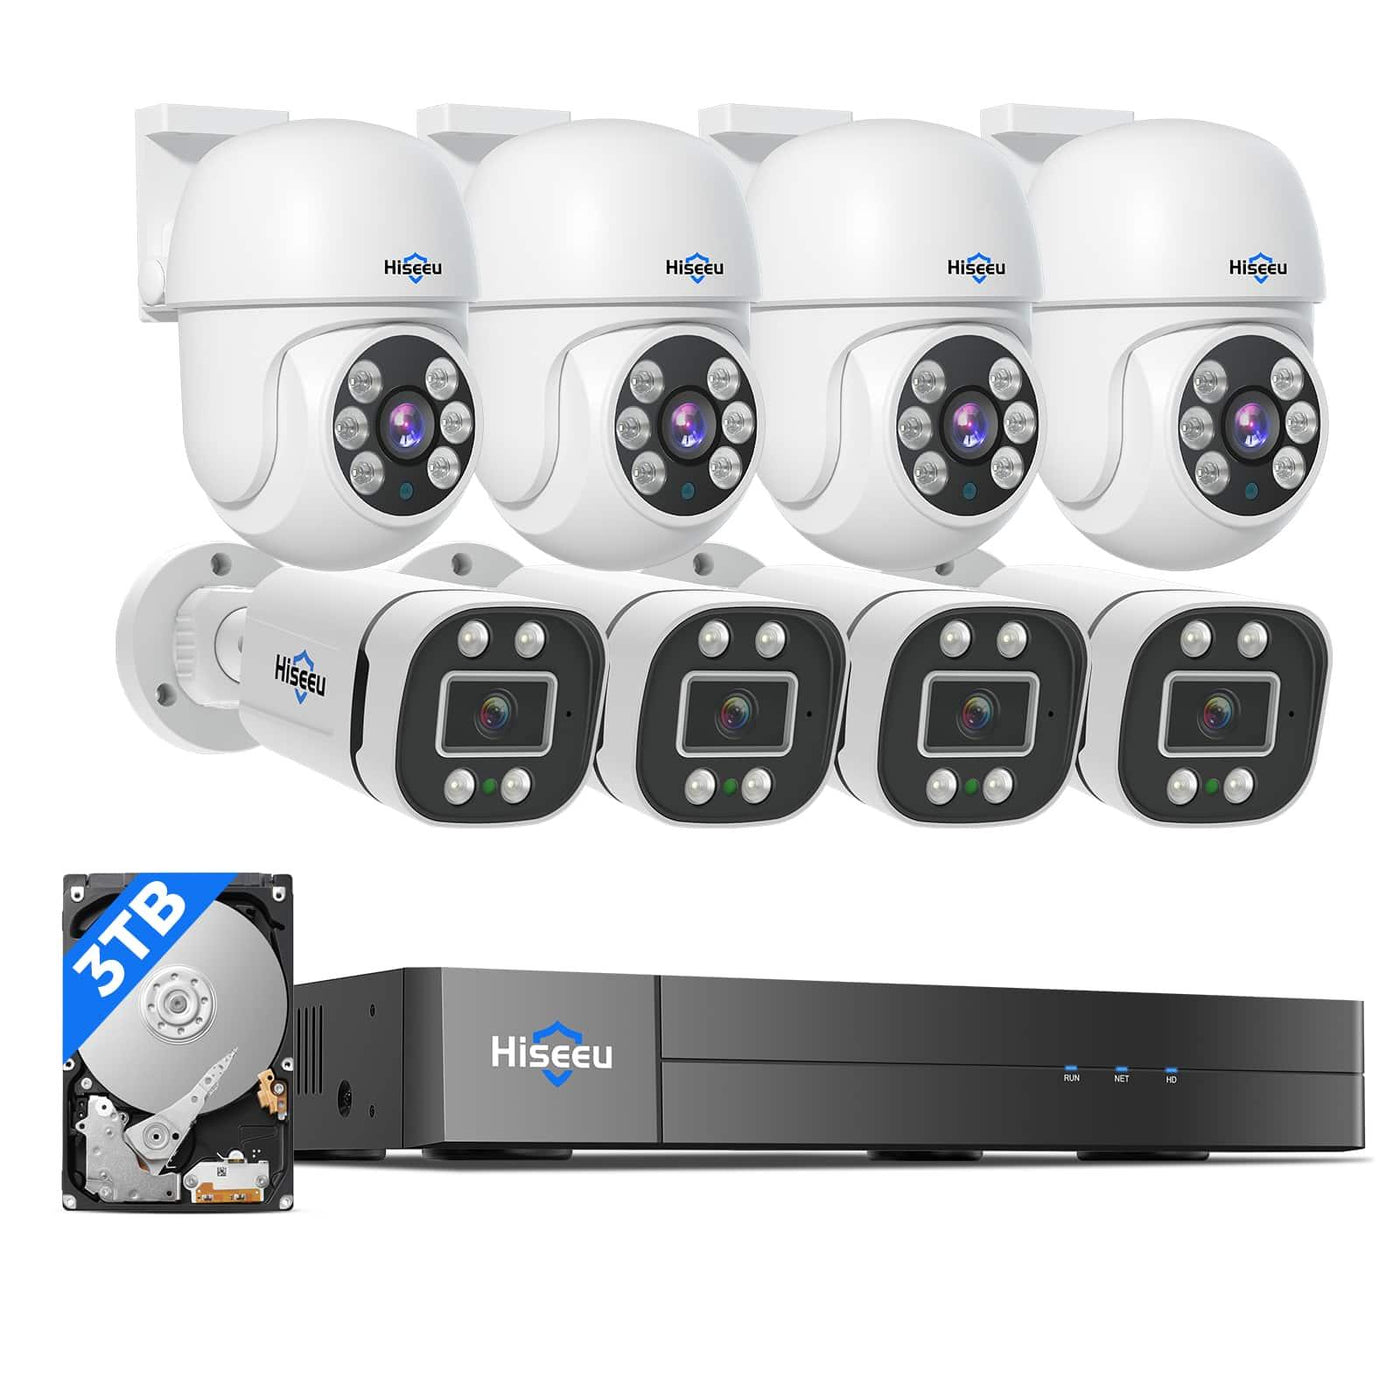 Hiseeu 3K PTZ Wired Security Camera System with AI Human/Vehicle Detection 8ch 5MP H.265+ DVR 8PCS TVI Cameras 3TB HDD Home CCTV Camera System 355°Pan+90°Tilt,Outdoor&Indoor,Night Vision,24/7 Record